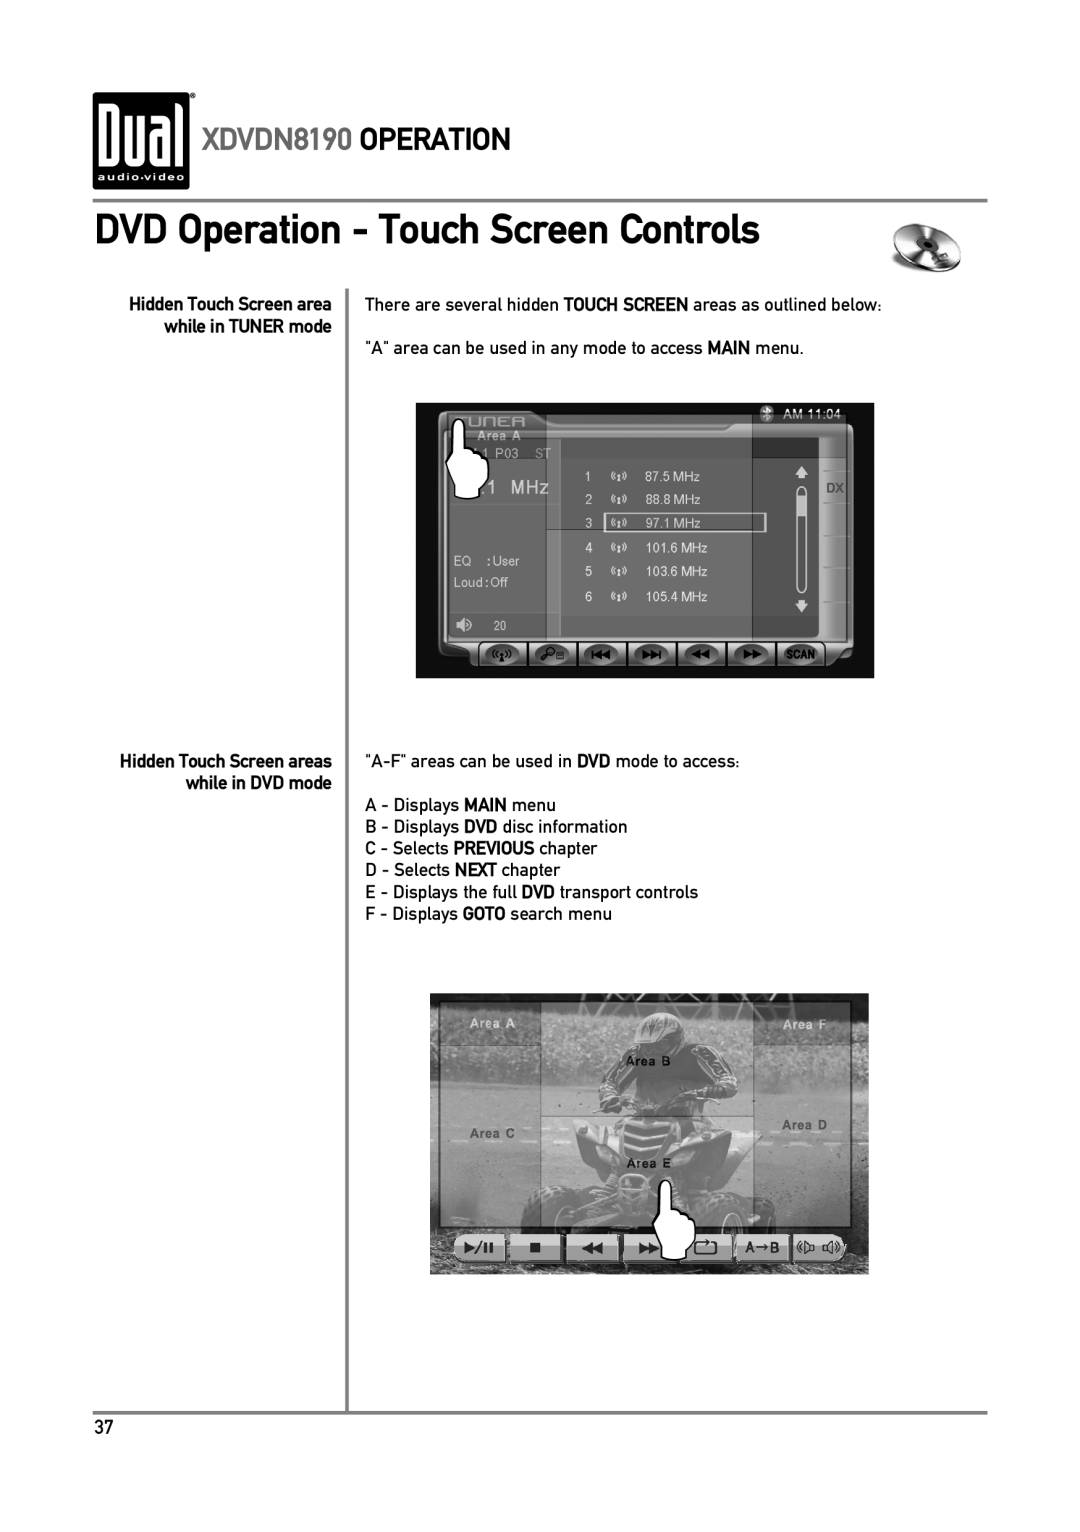 Dual owner manual DVD Operation - Touch Screen Controls, XDVDN8190 OPERATION 